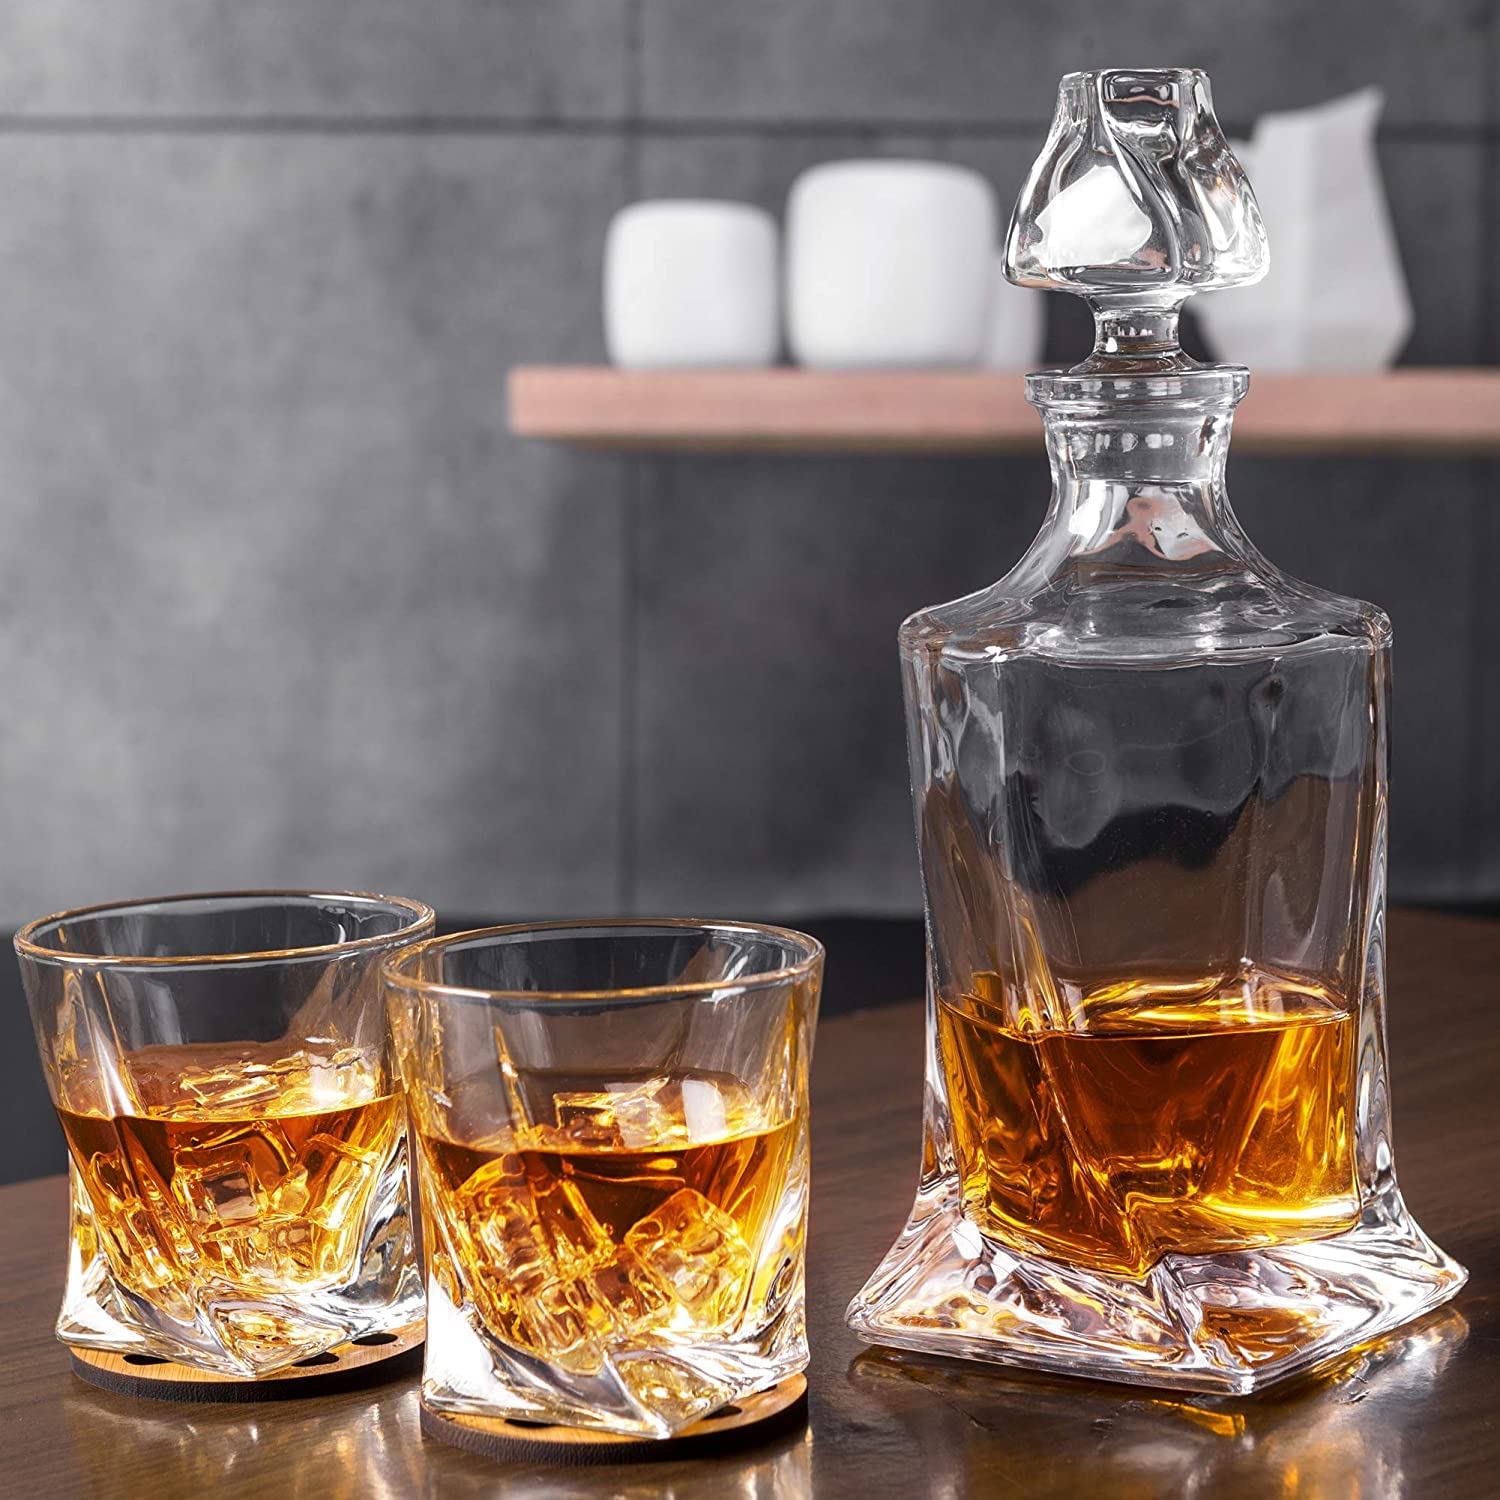 SMARTDECOR Crystal Decanter with pack of 6 glass Decanter Price in